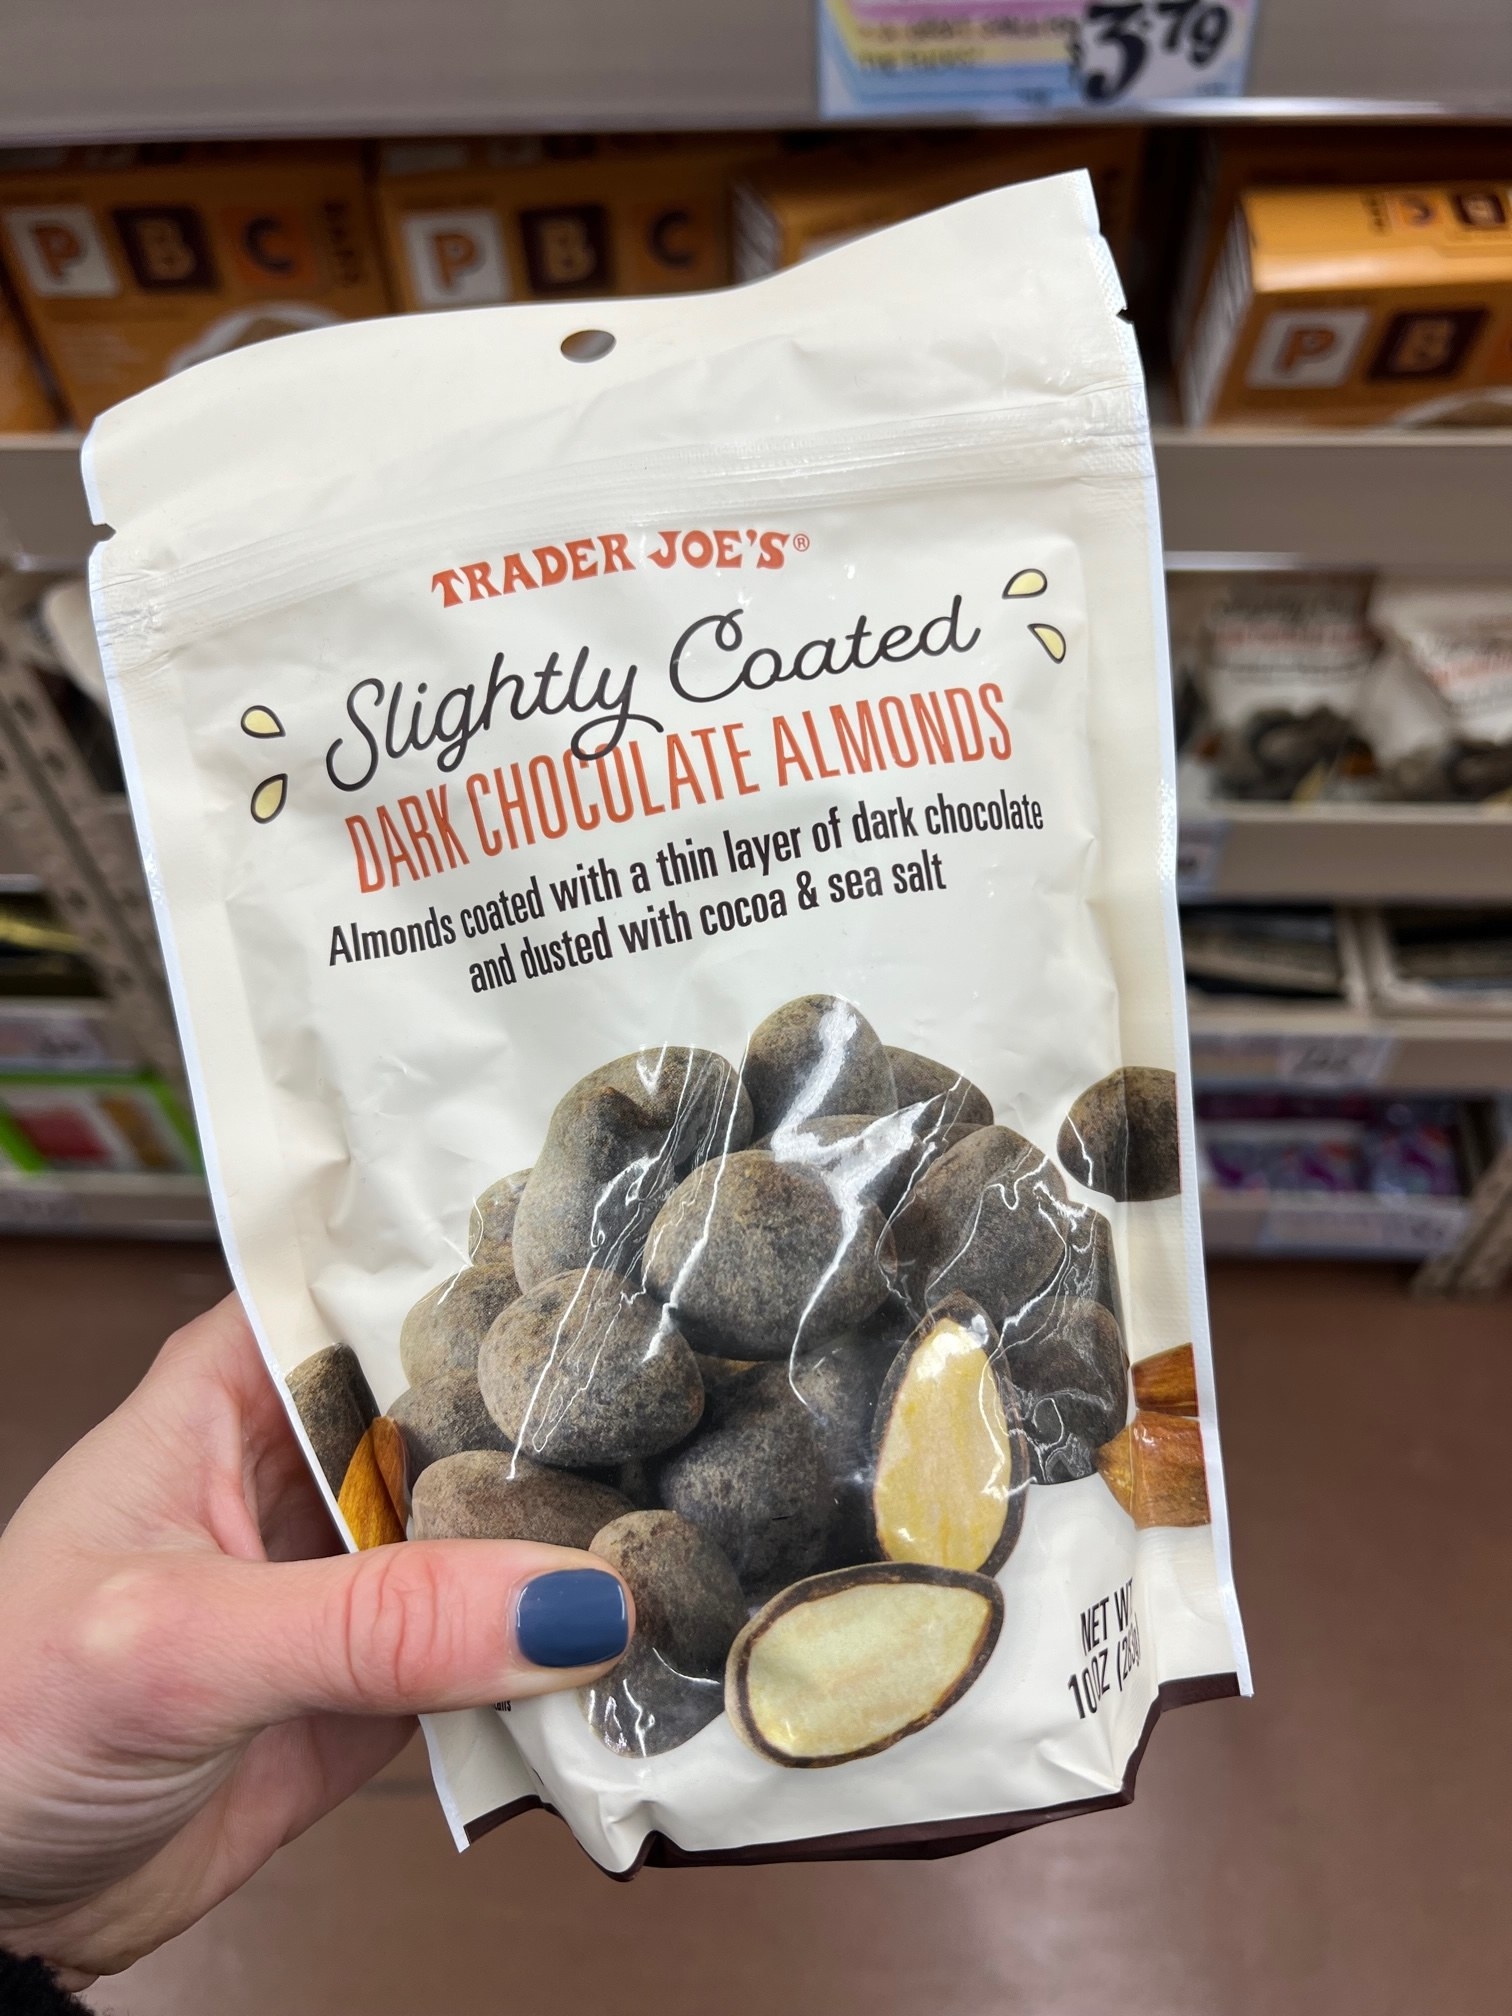 A bag of Slightly Coated Dark Chocolate Almonds: &quot;almonds coated with a thin layer of dark chocolate and dusted with cocoa &amp;amp; sea salt&quot;